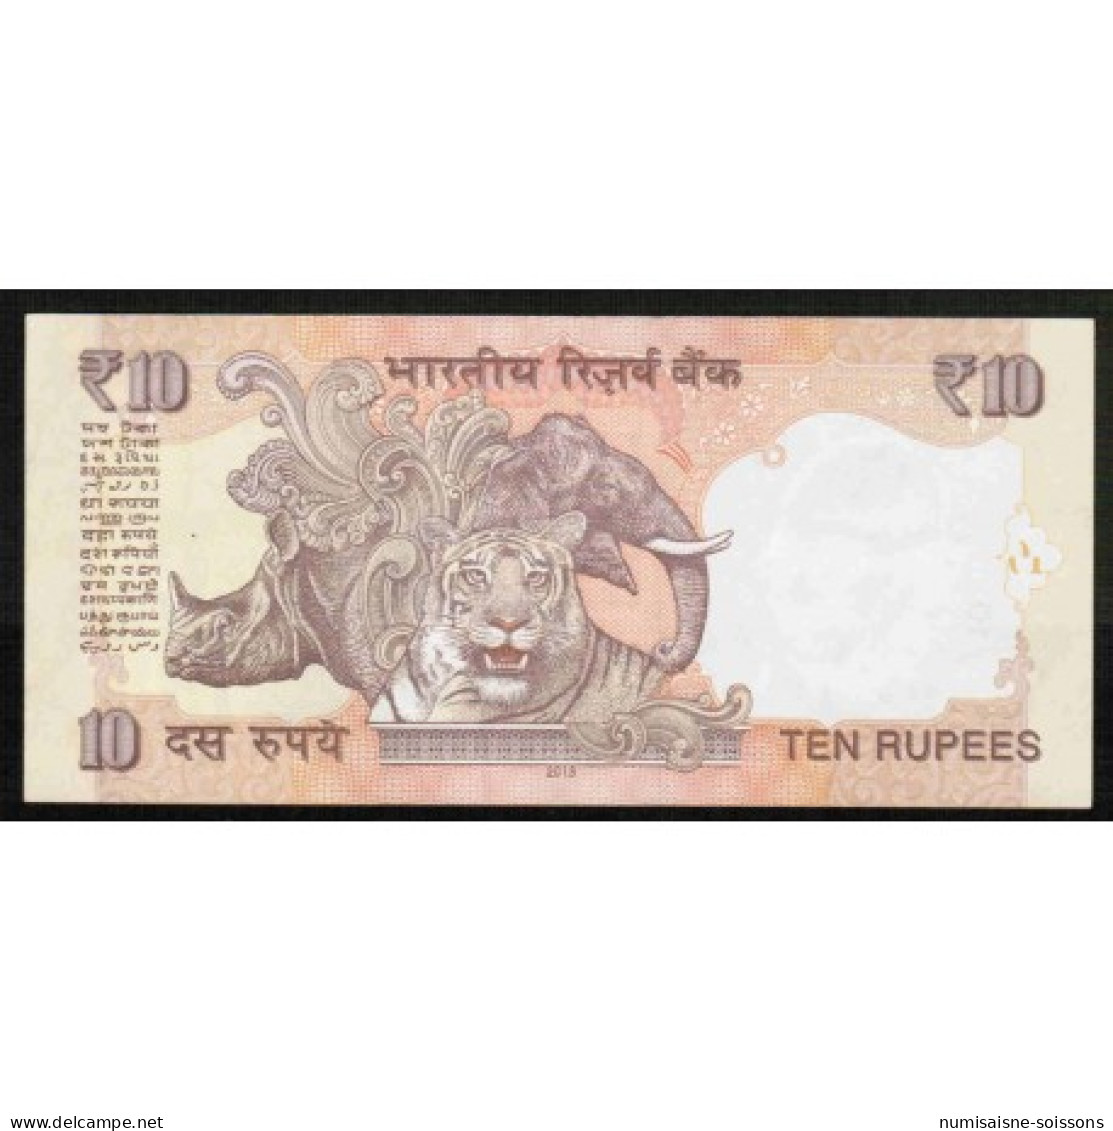 INDE - PICK 89 E - 10 RUPEES - NON DATE (1996) - LETTRE A - SUP - India